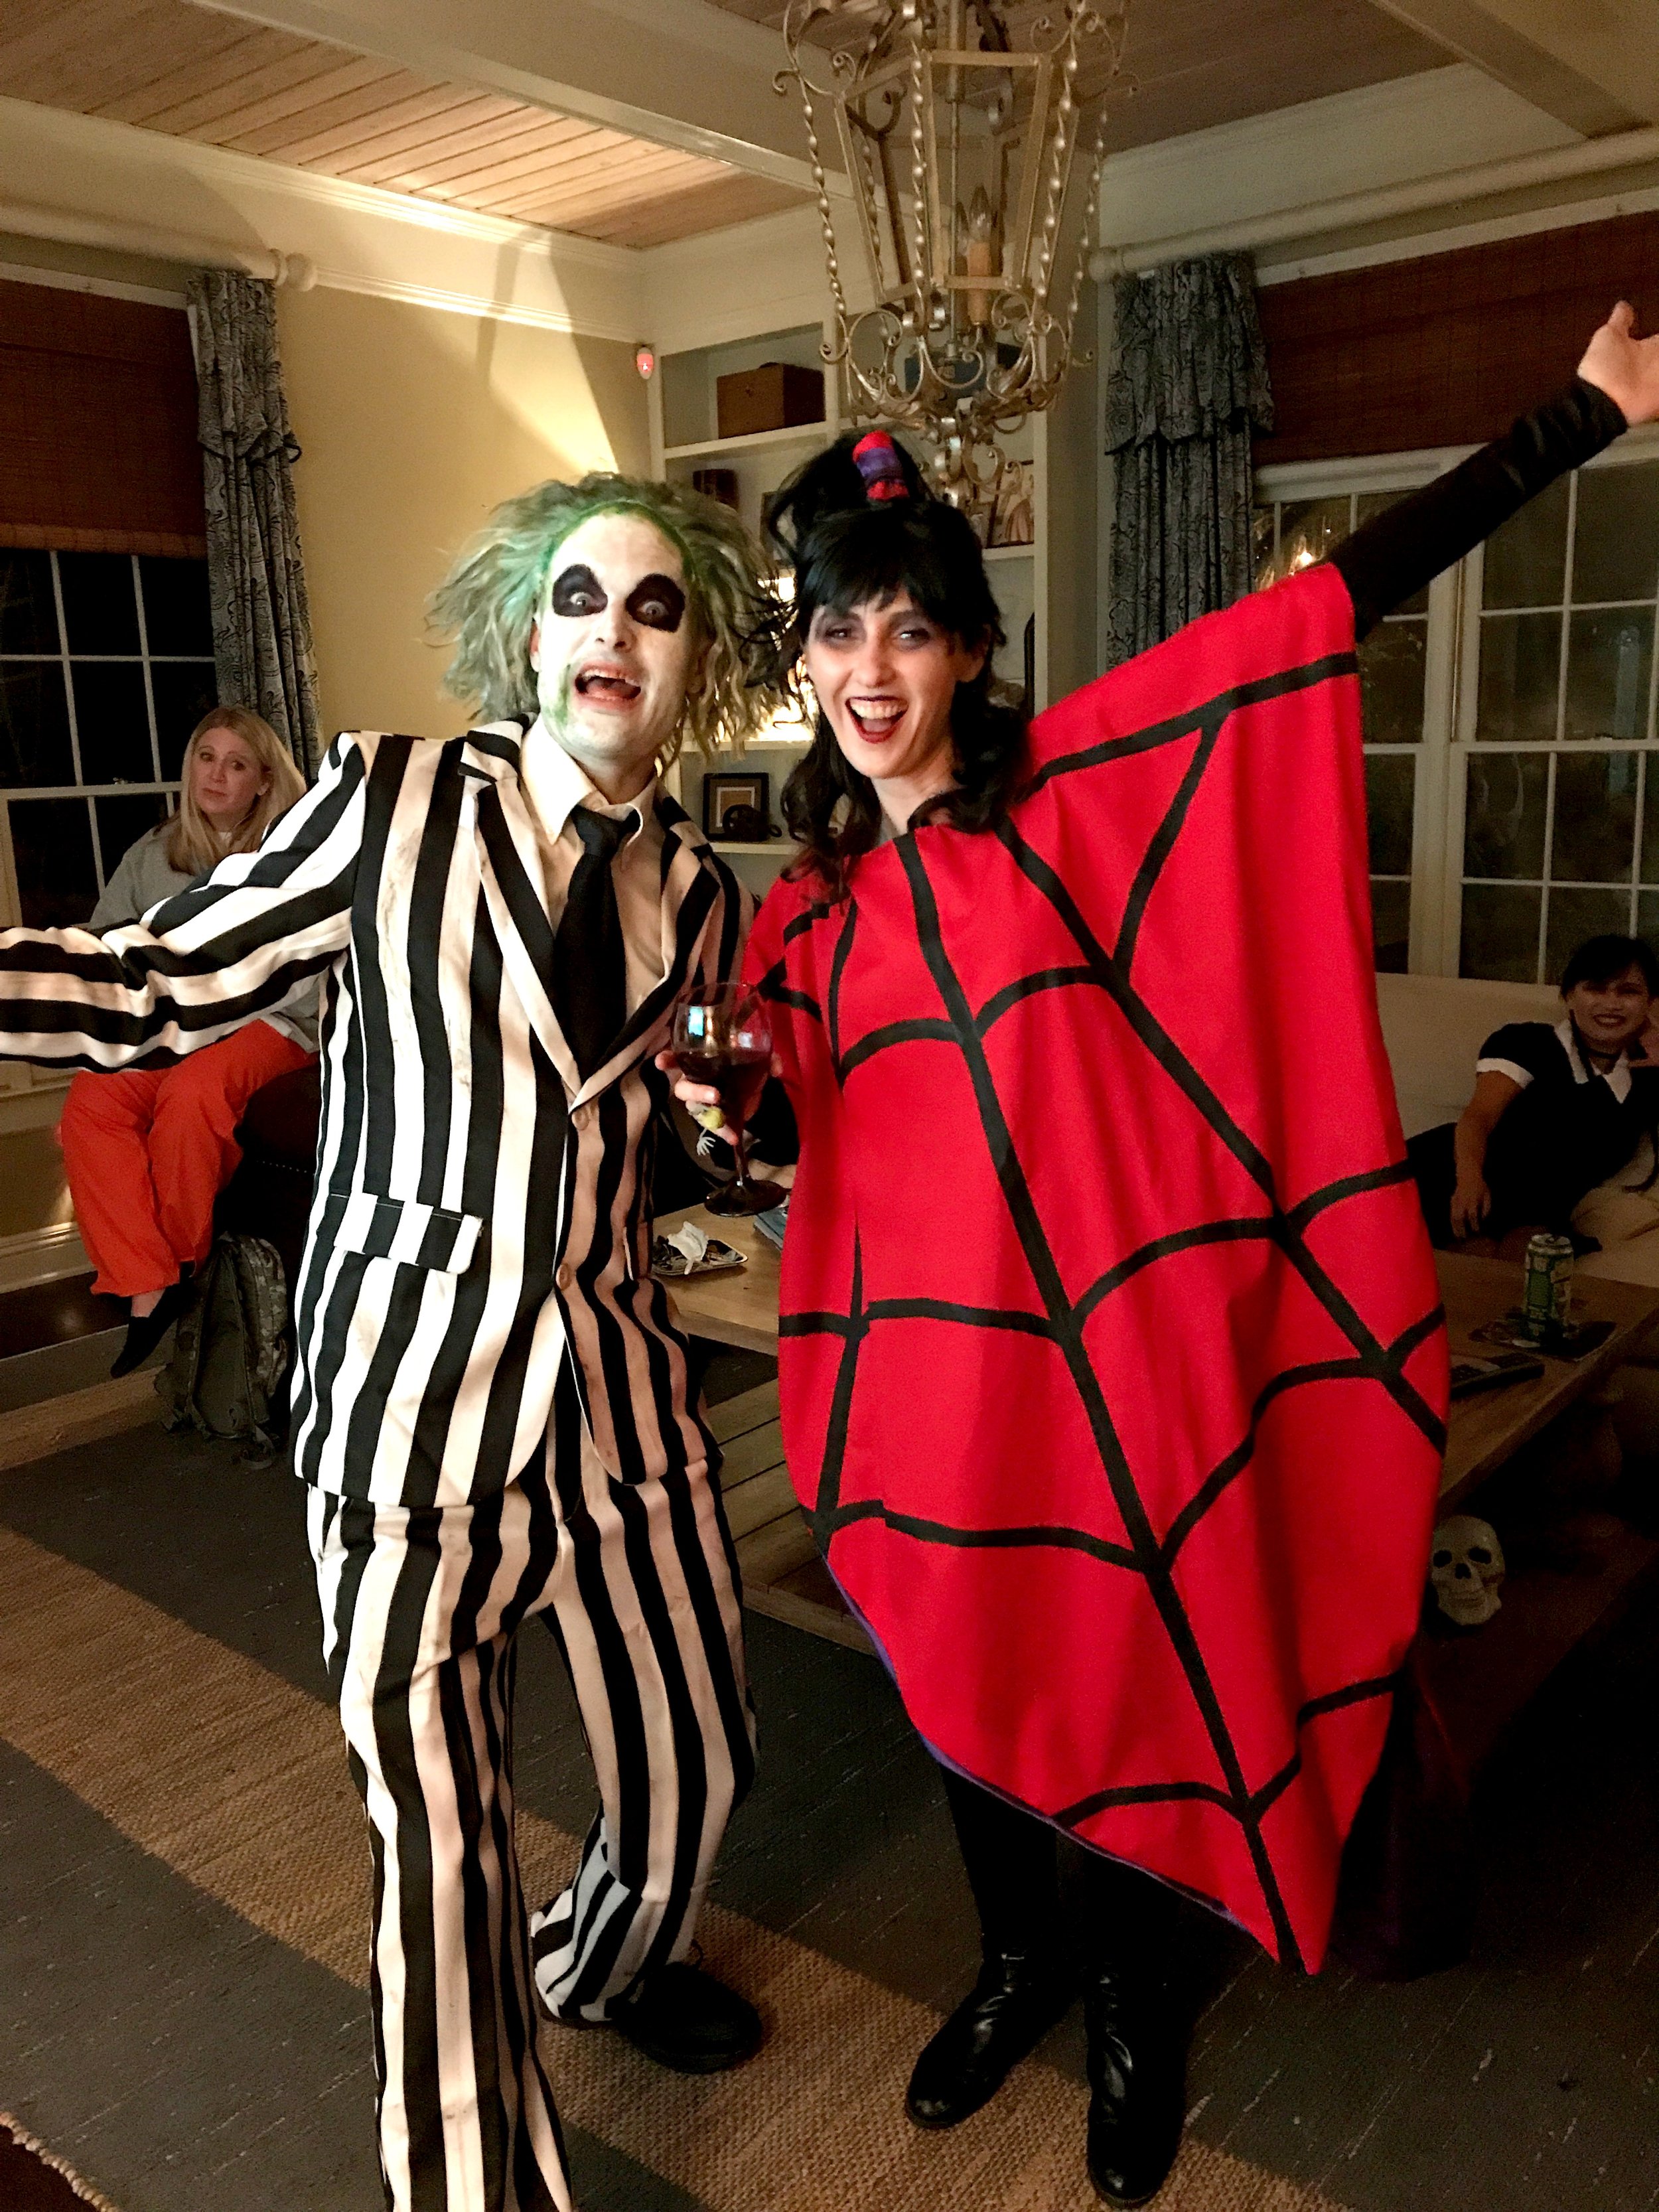 Best-Ever Couples Halloween Costume Ideas — Andrea's Cooktales